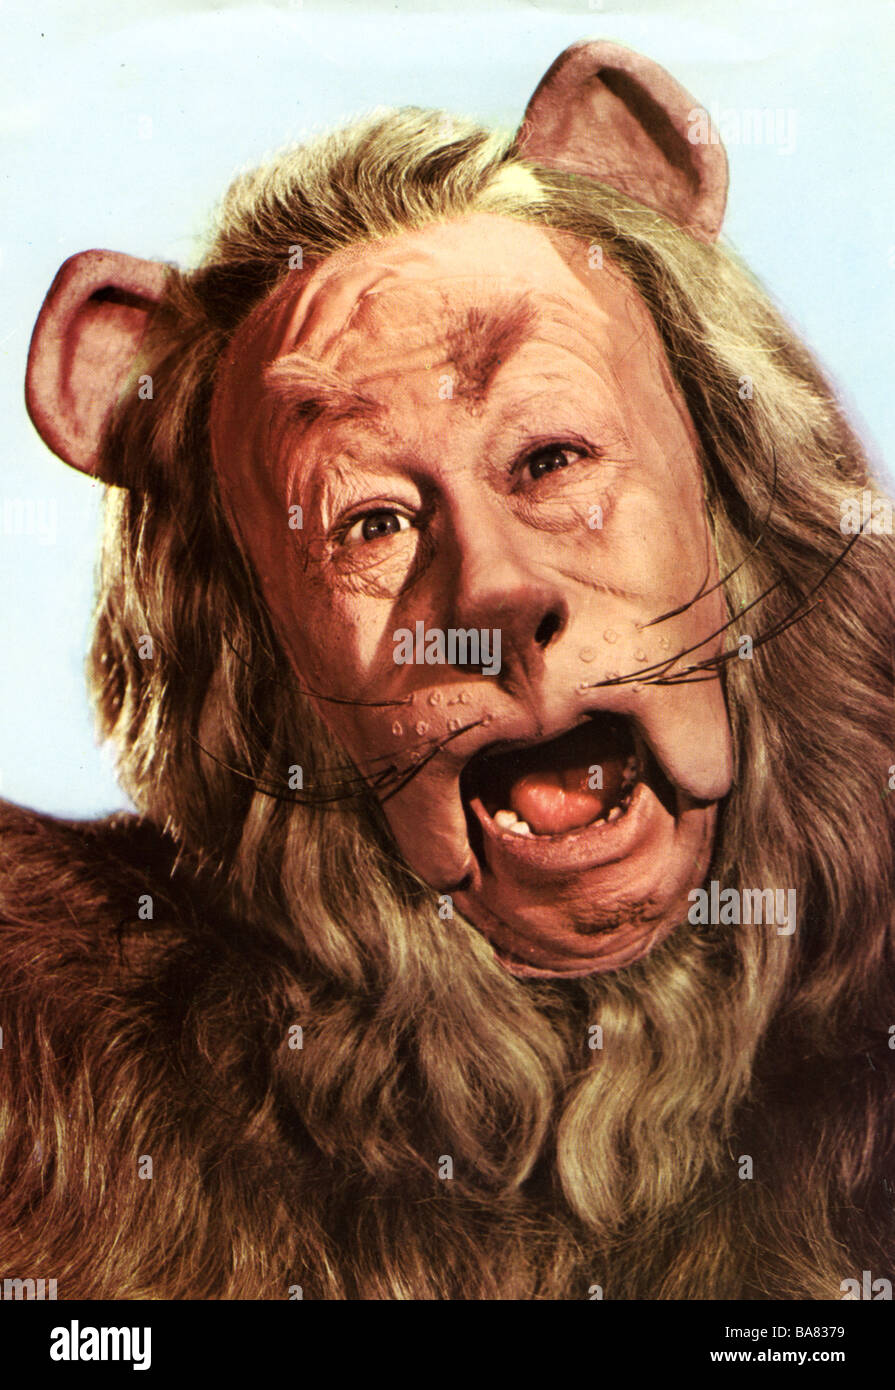 the-wizard-of-oz-1939-mgm-film-with-bert-lahr-as-the-cowardly-lion-BA8379.jpg